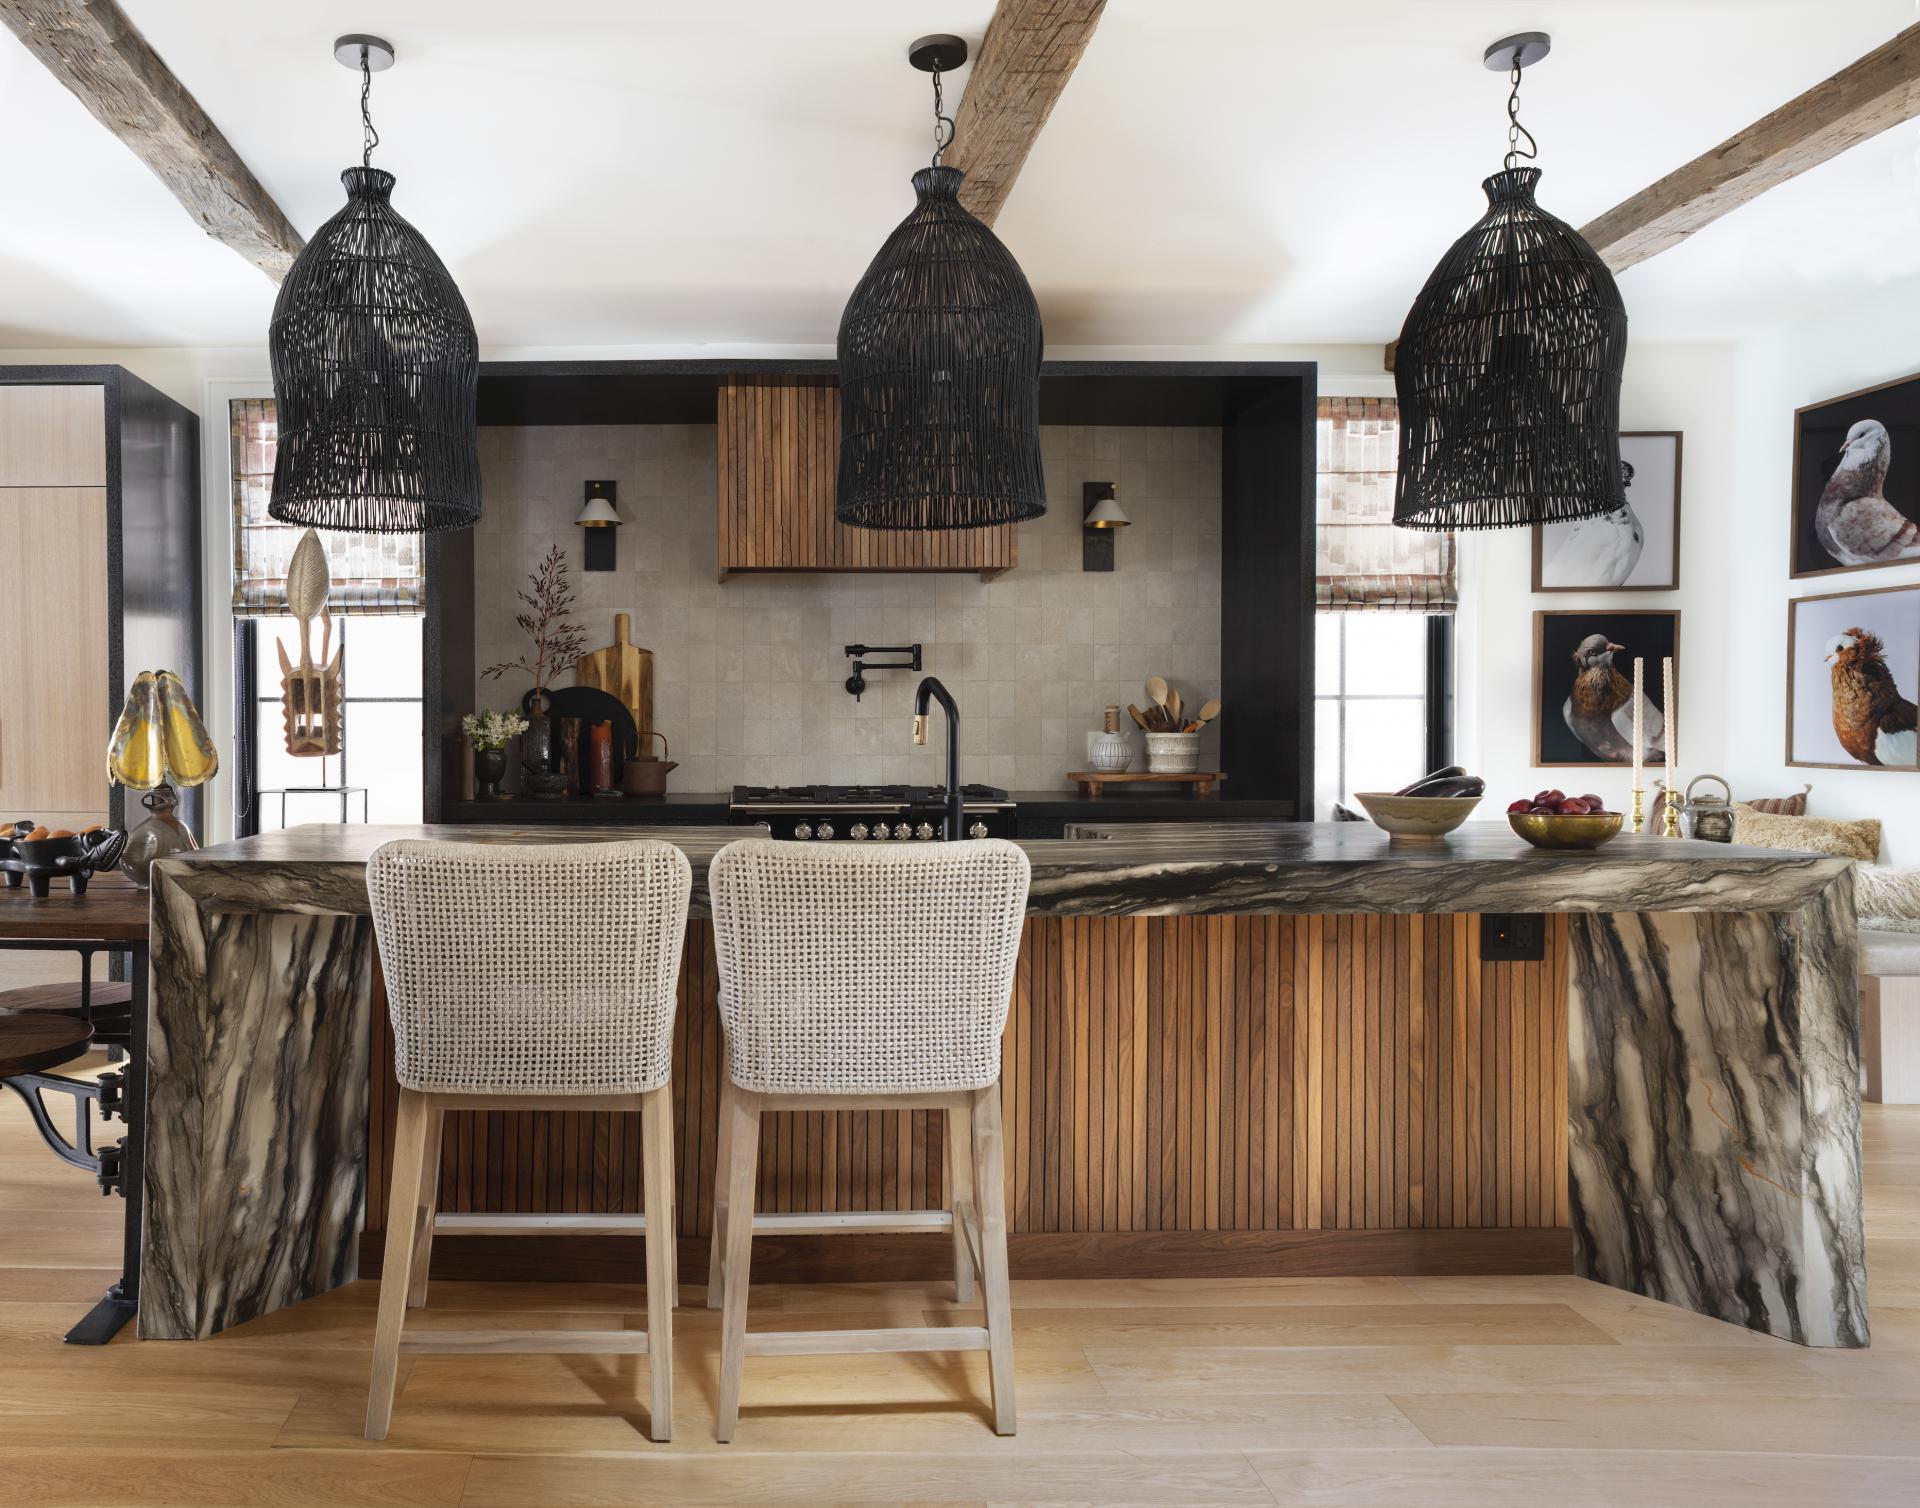 Henrietta Southam's 2,800 sq ft Tribal Chic Home for Her Blended Family in Canada